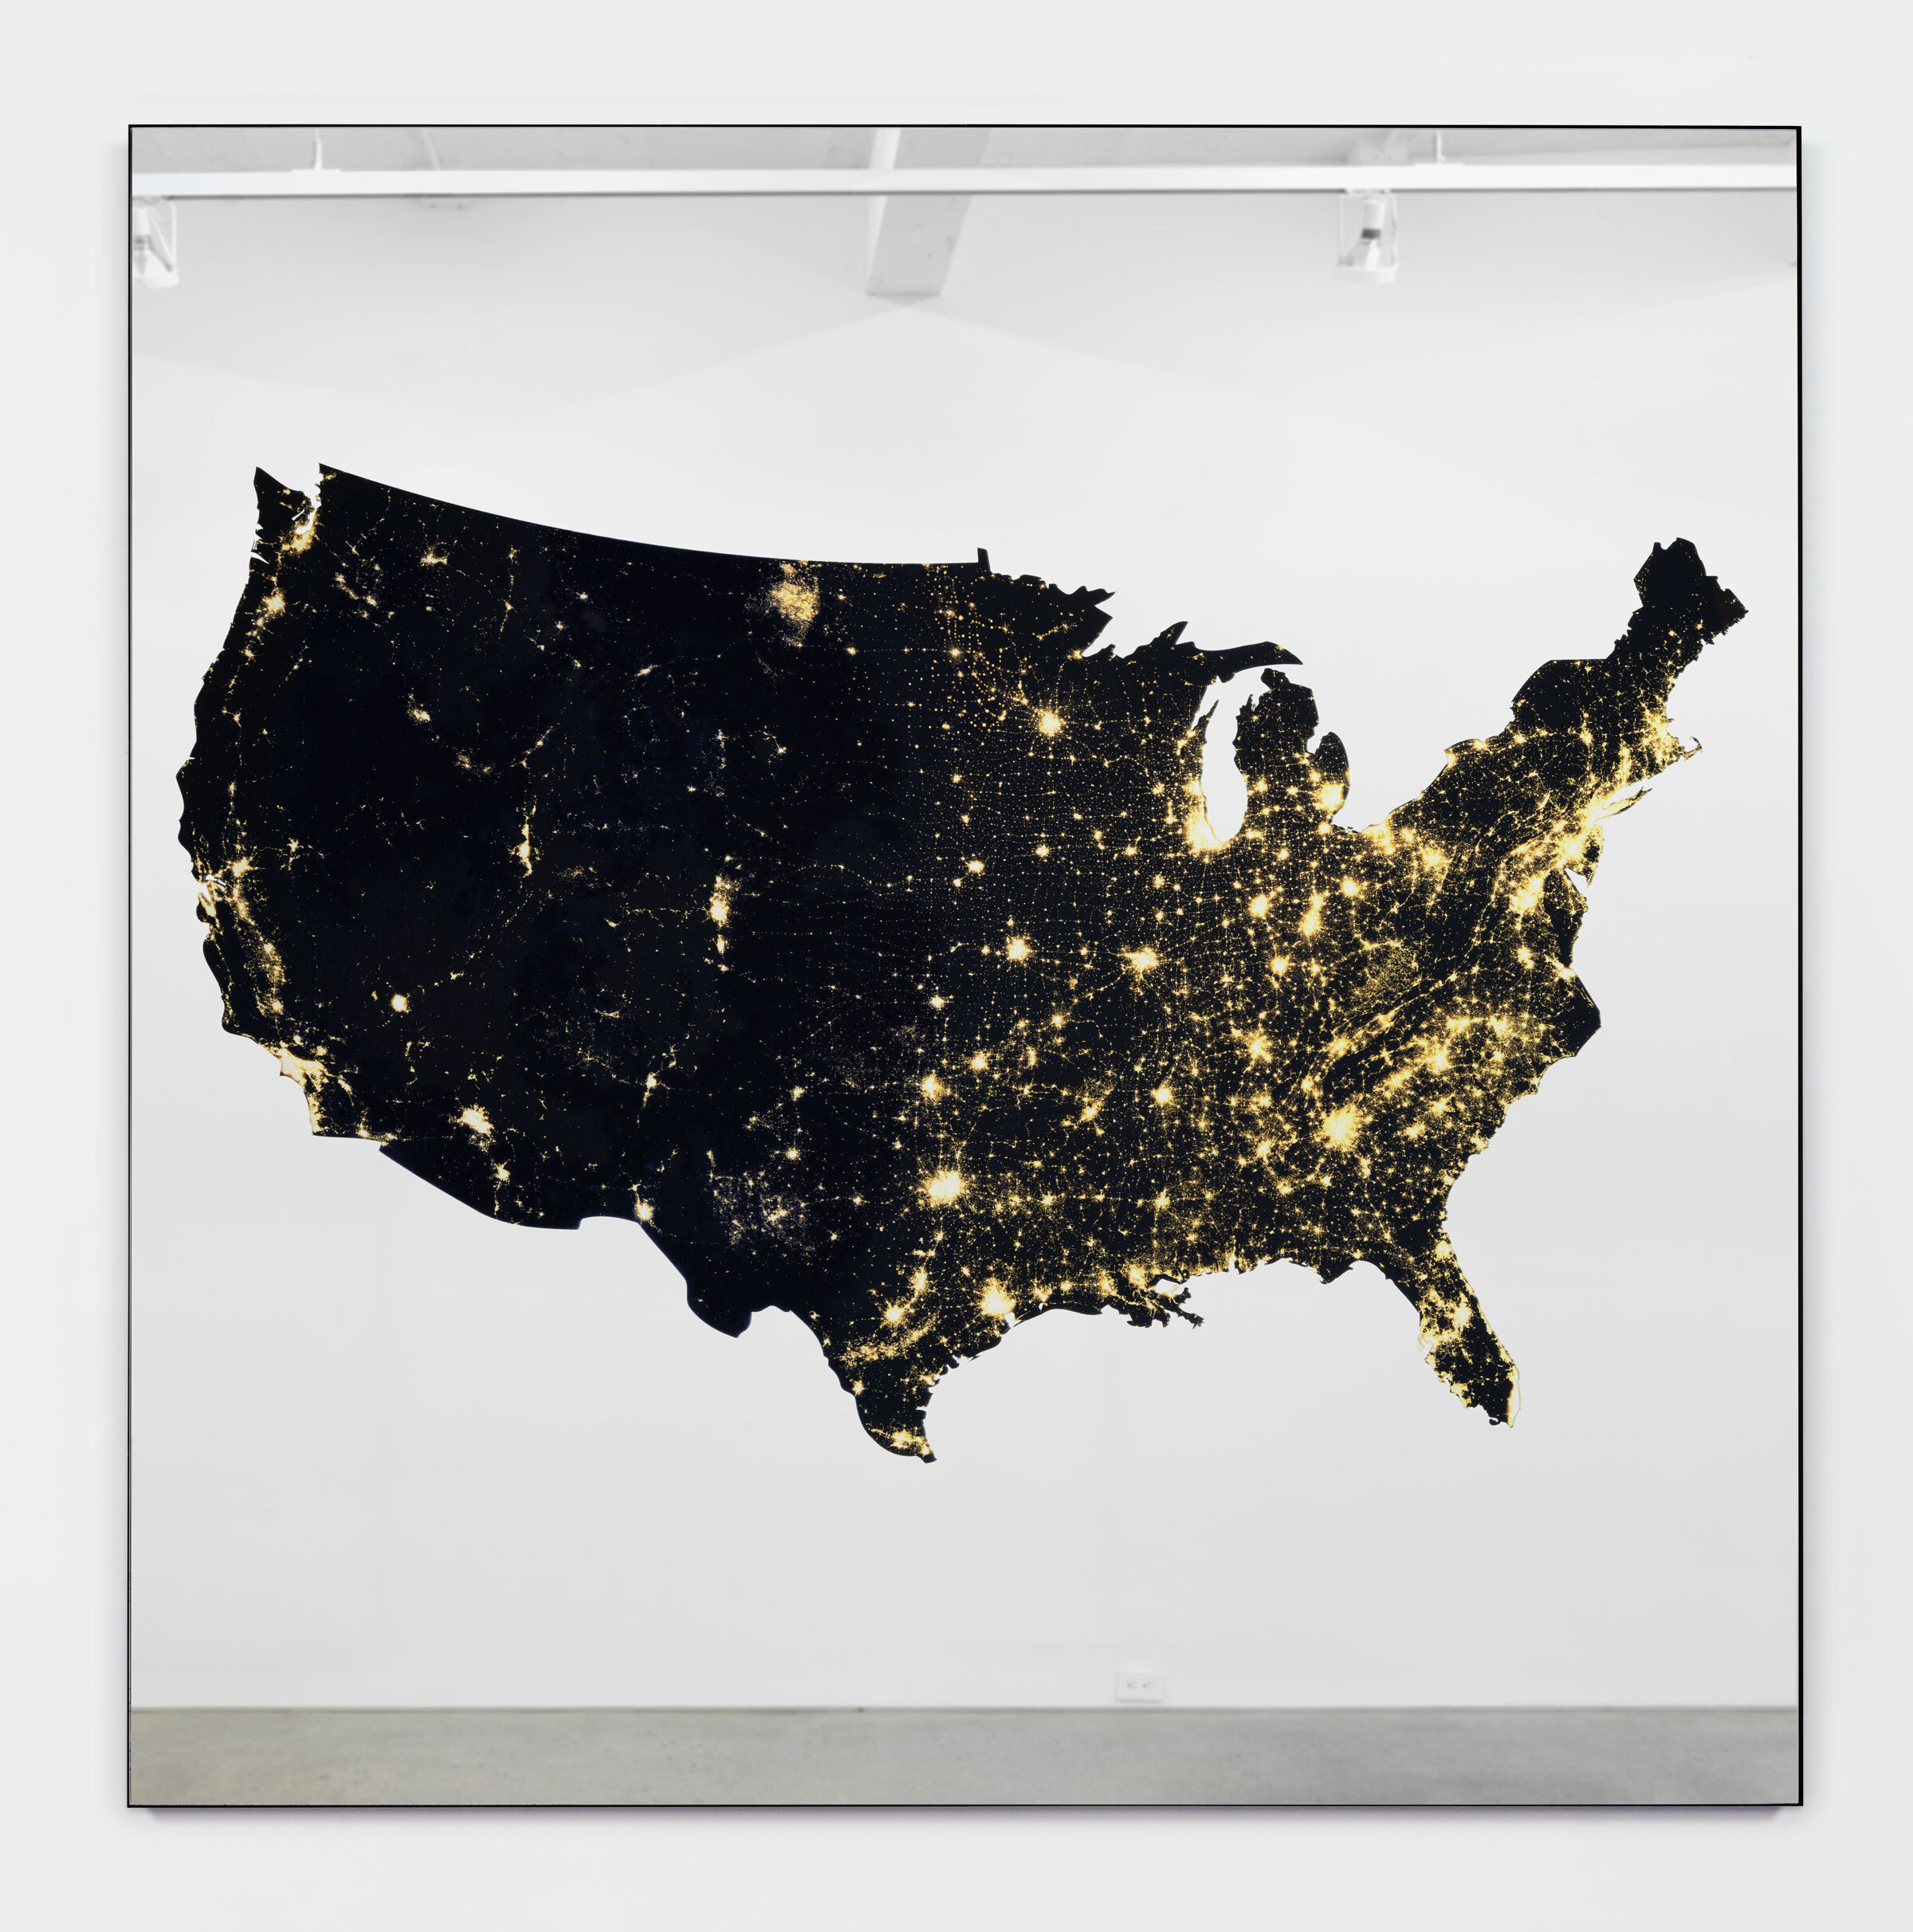 Ken Lum, America at Night,  2021, Canon LED curable inks, mirror, aluminum, 72h x 72w in.